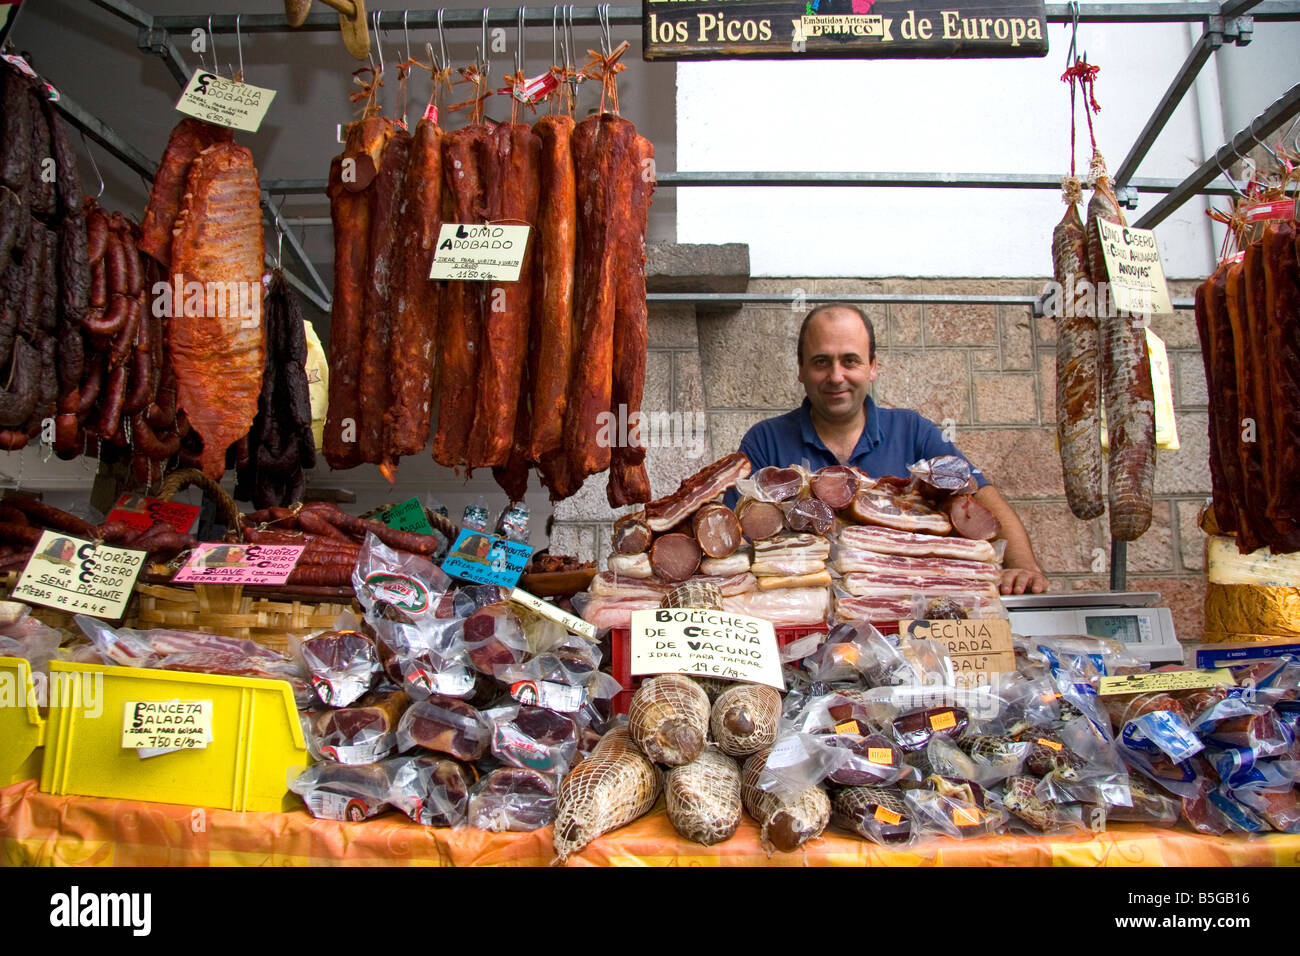 Vendor selling cured meats at an outdoor market in the town of Cangas de Onis Asturias northern Spain Stock Photo